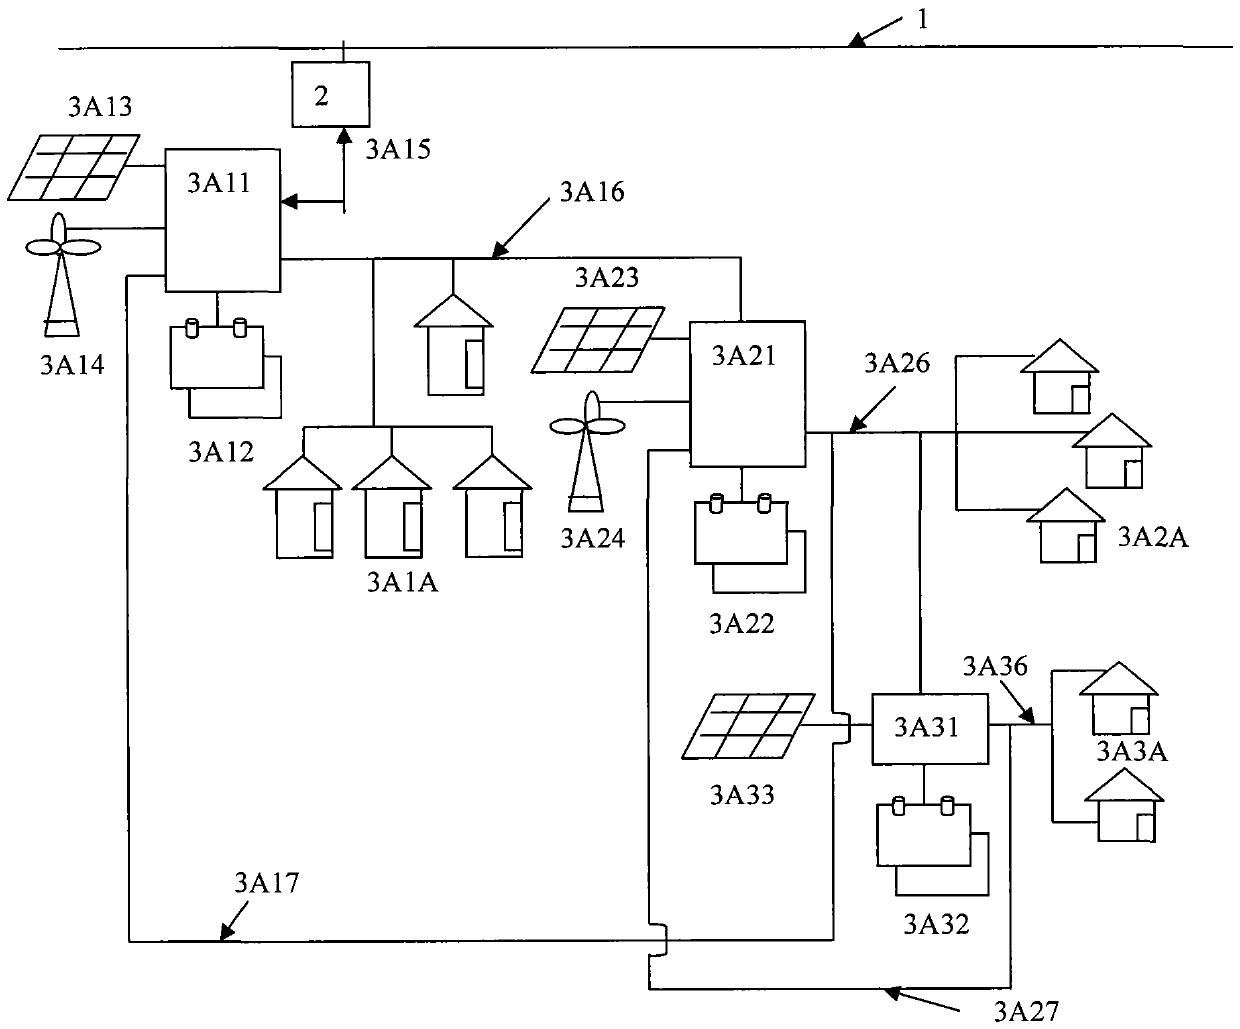 A piconet system for building high-efficiency microgrids